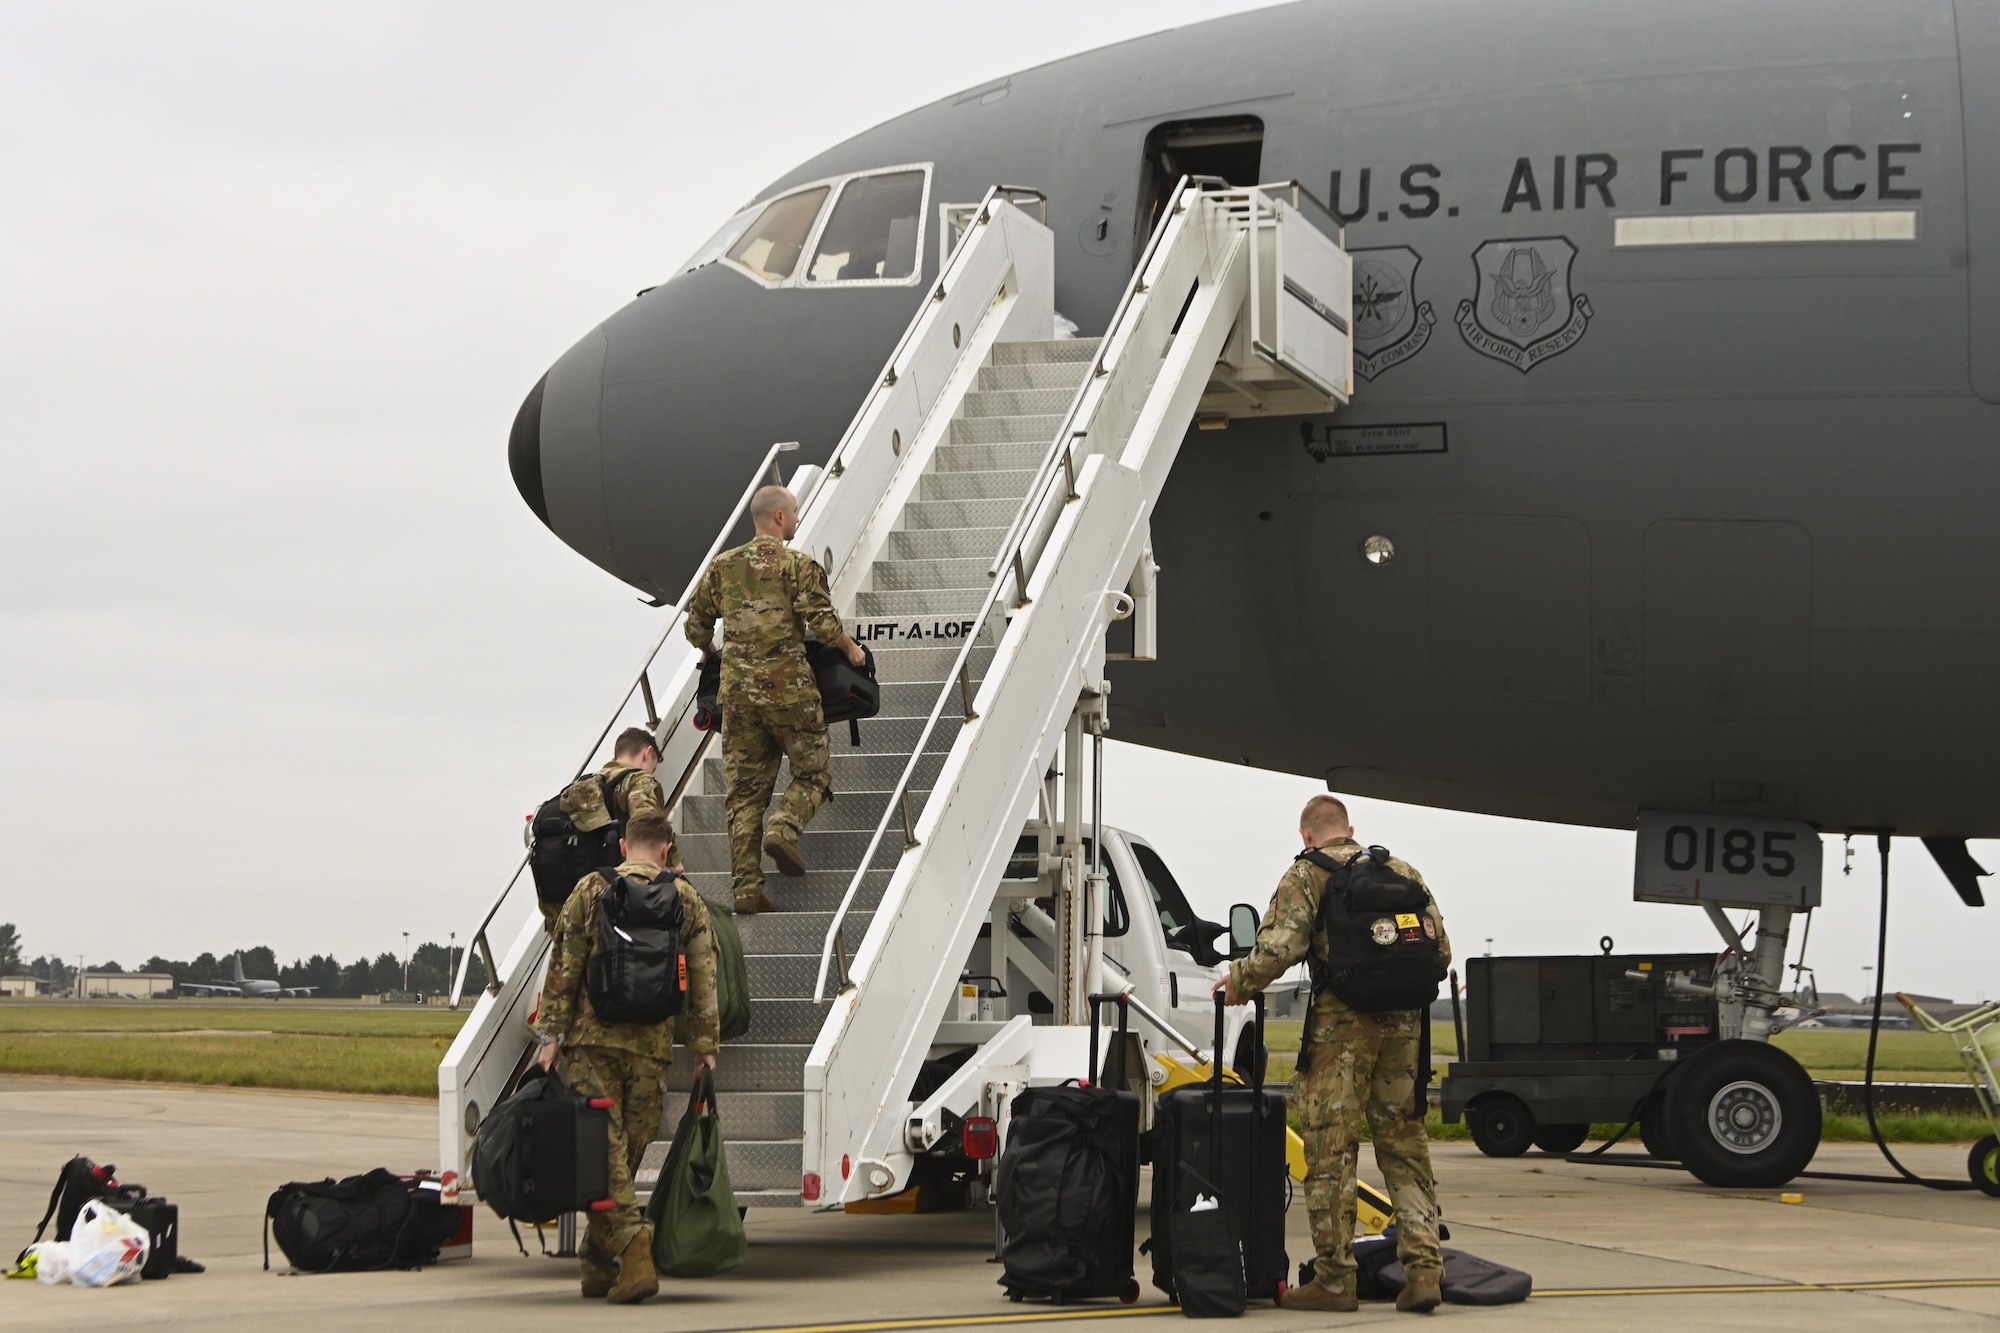 U.S. Air Force Airmen assigned to the 60th Air Mobility Wing, Travis Air Force Base, California, board a KC-10 Extender aircraft before a flight at Royal Air Force Mildenhall, England, Sept. 2, 2021. RAF Mildenhall served as a staging area for the 60th AMW in their evacuation of eligible foreigners and vulnerable Afghans during Operation Allies Refuge. (U.S. Air Force photo by Senior Airman Joseph Barron)